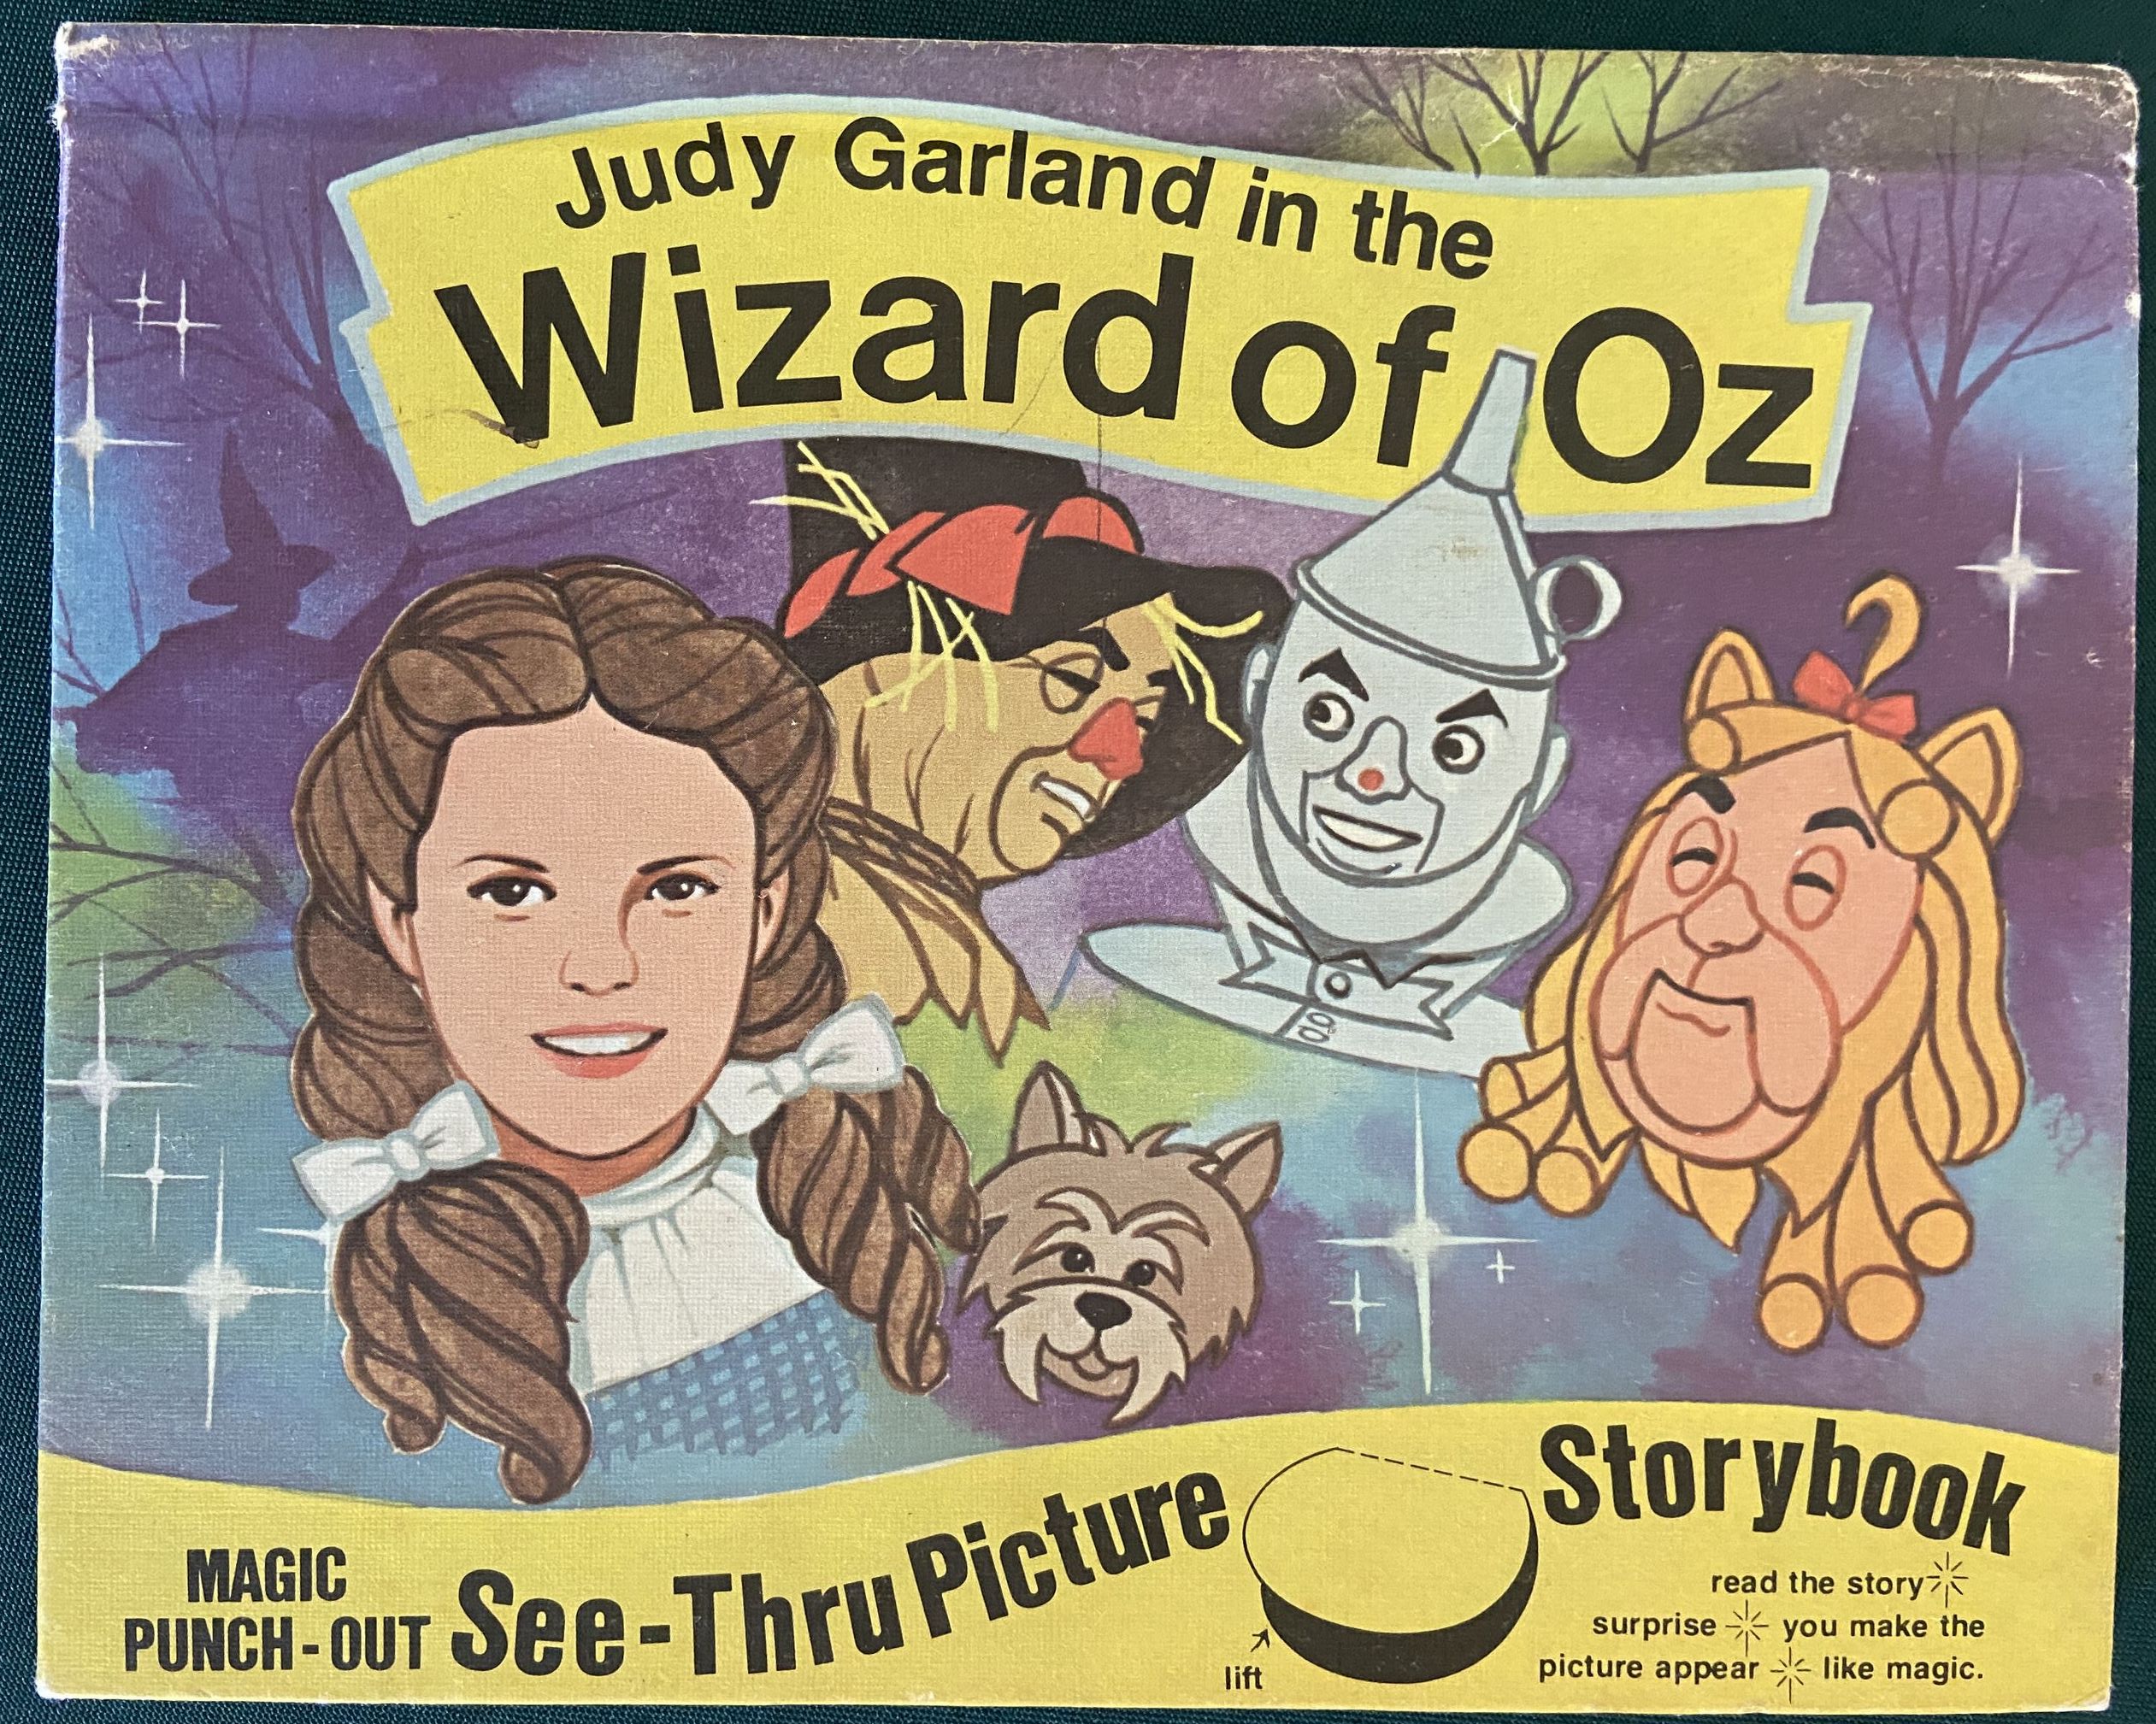 Judy Garland in The Wizard of Oz See Thru Picture Storybook 1977 -  Wonderful Books of Oz